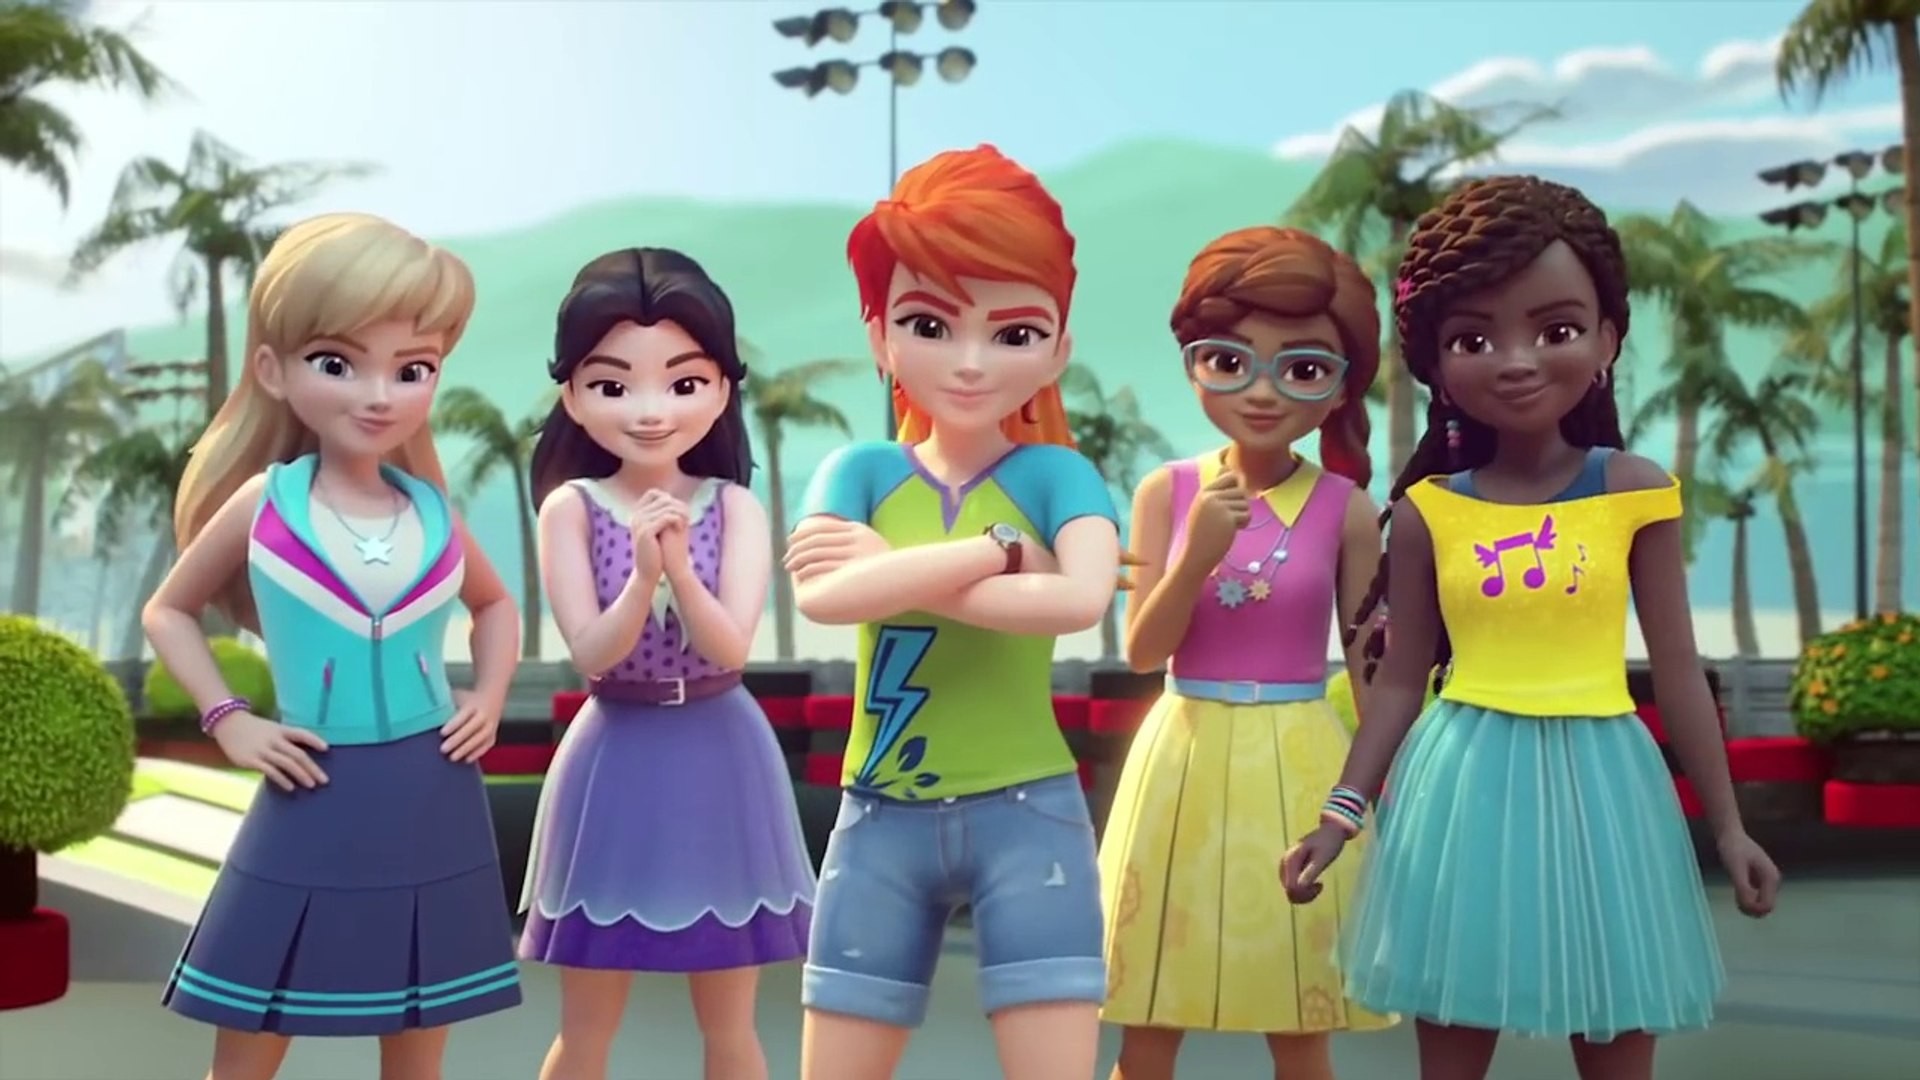 1920x1080 LEGO Friends: Girls On A Mission - Ep 10 "The Team"